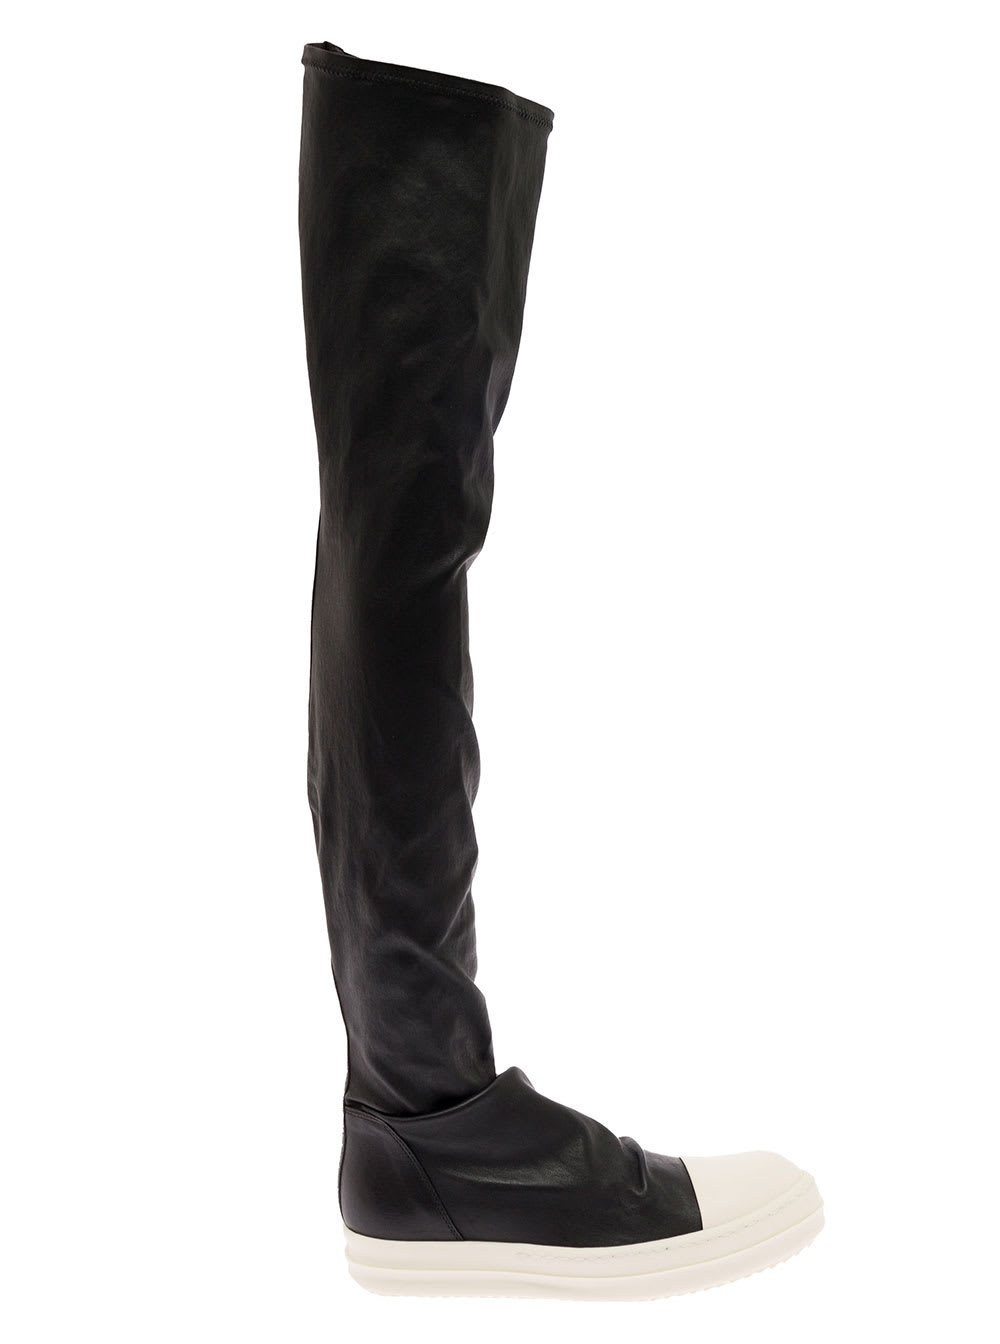 Rick Owens Womans Stocking Sneak Black Leather Boots